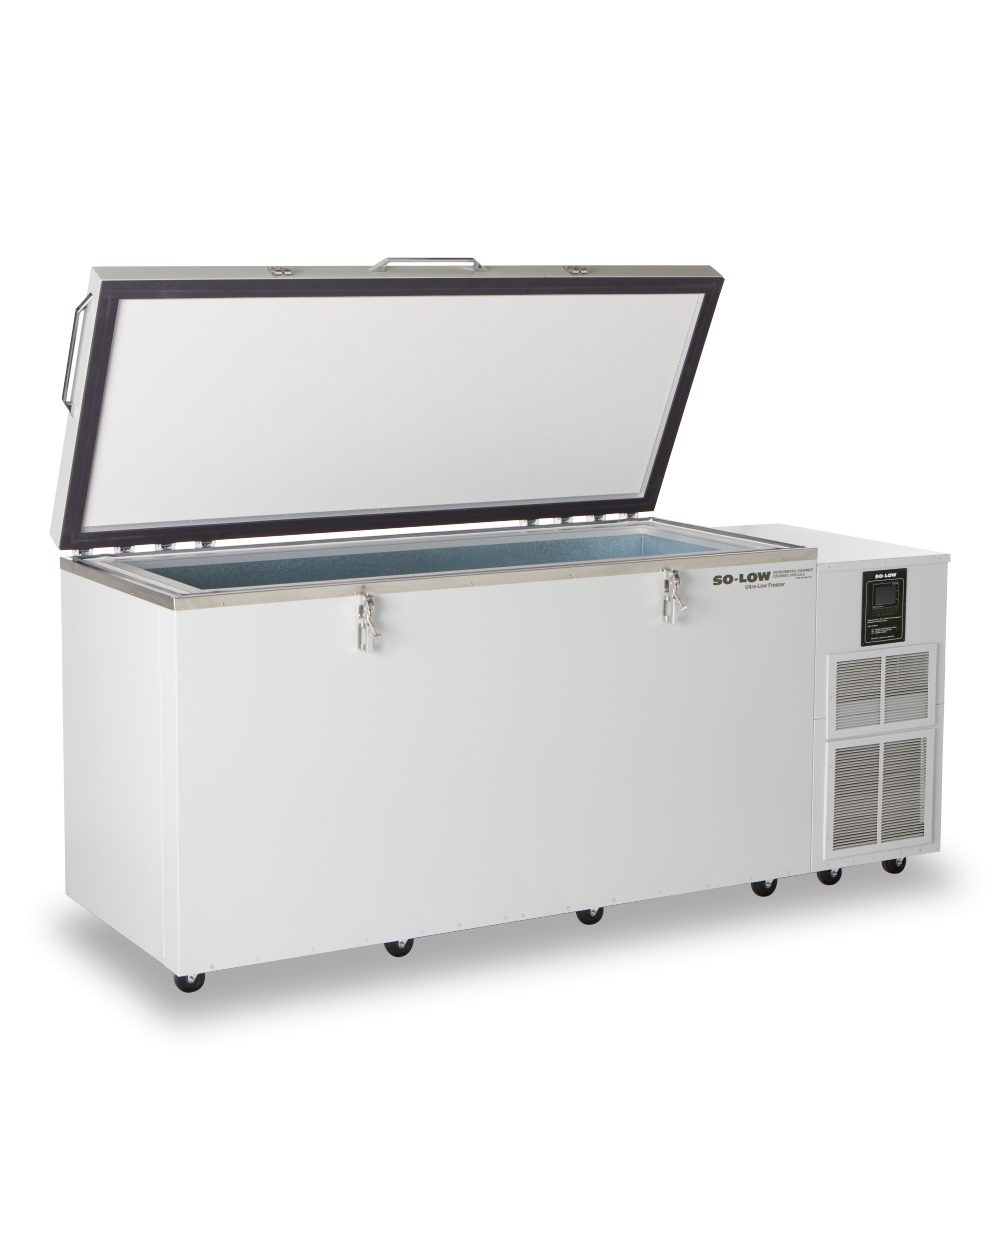 Chest style Ultra-Low Temperature Freezers are designed for a variety of uses including shrink fitting, and ultra cold storage of product down to -85°C. The chest freezer style allows for efficient storage. Freezer Sizes range from 3 to 27 cubic feet capacities.